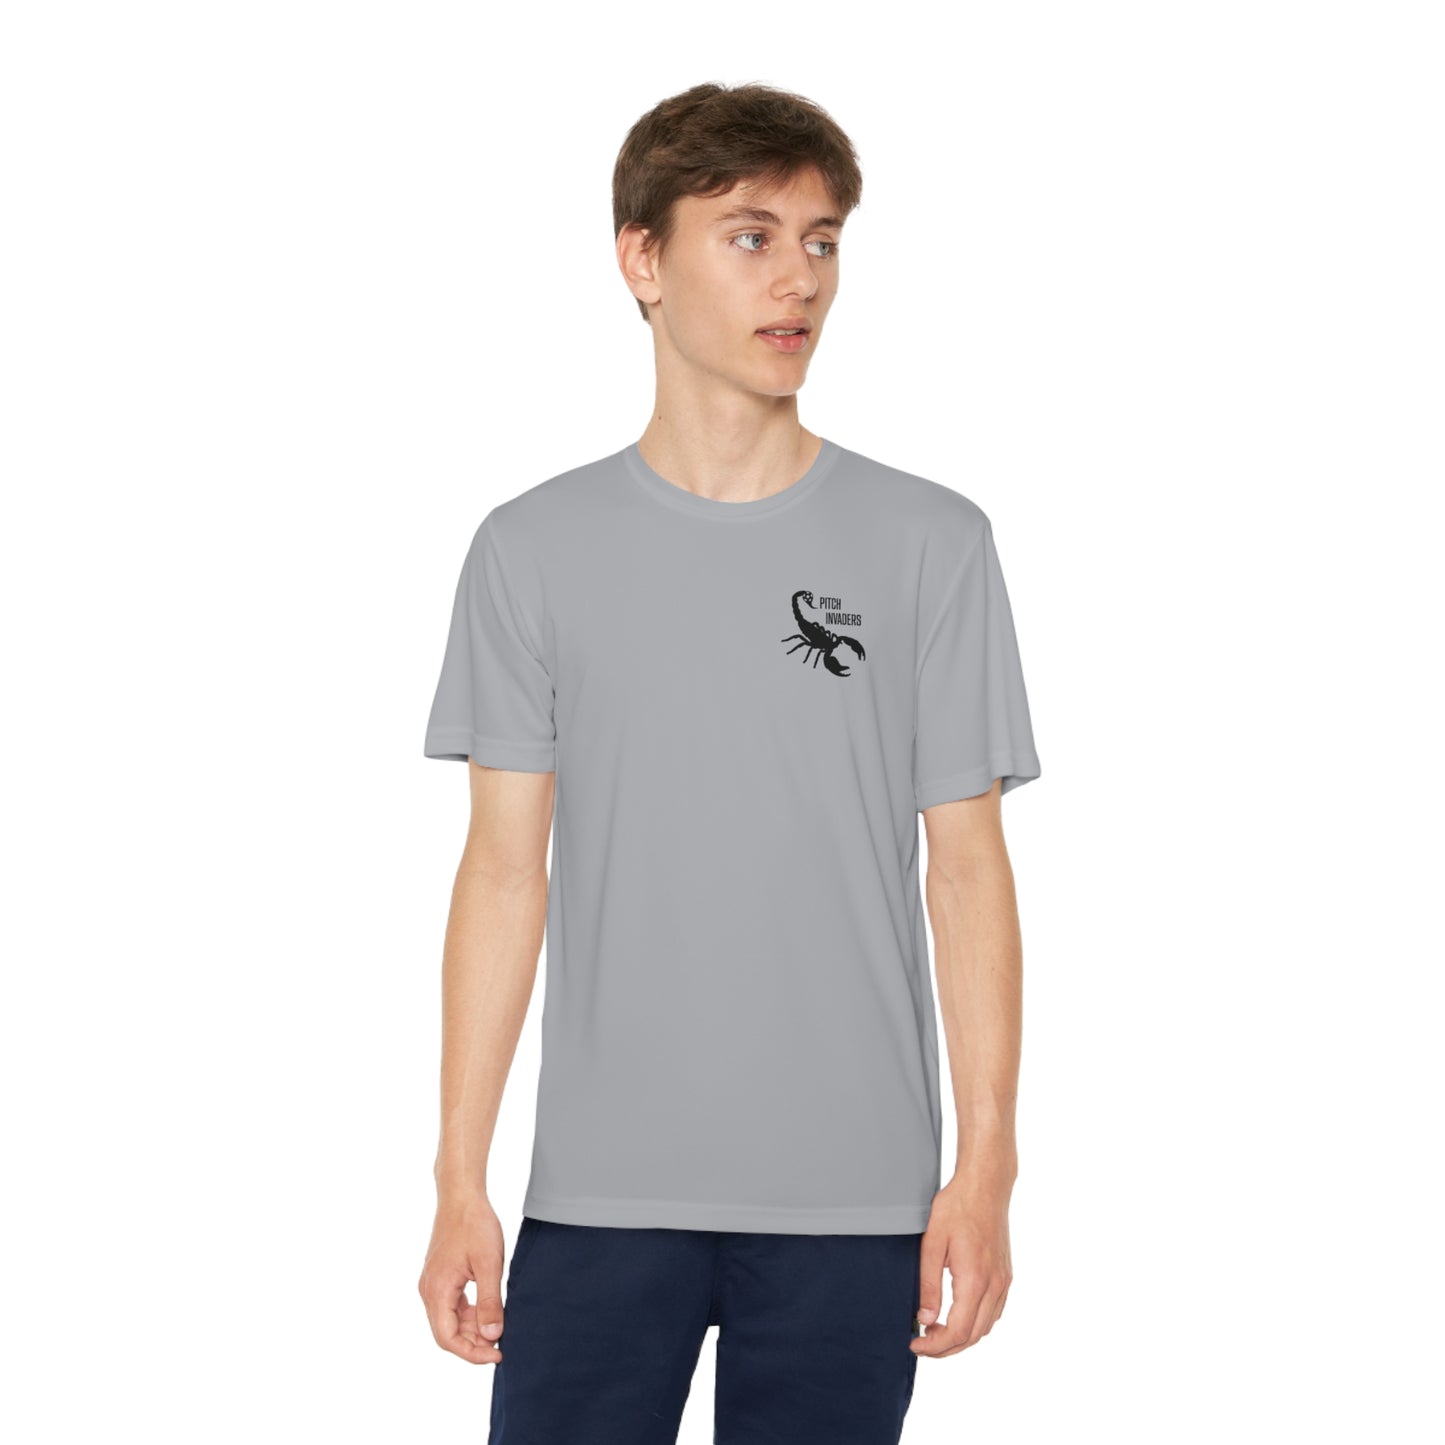 TOP BINS ONLY Youth Athletic T-Shirt (Unisex)